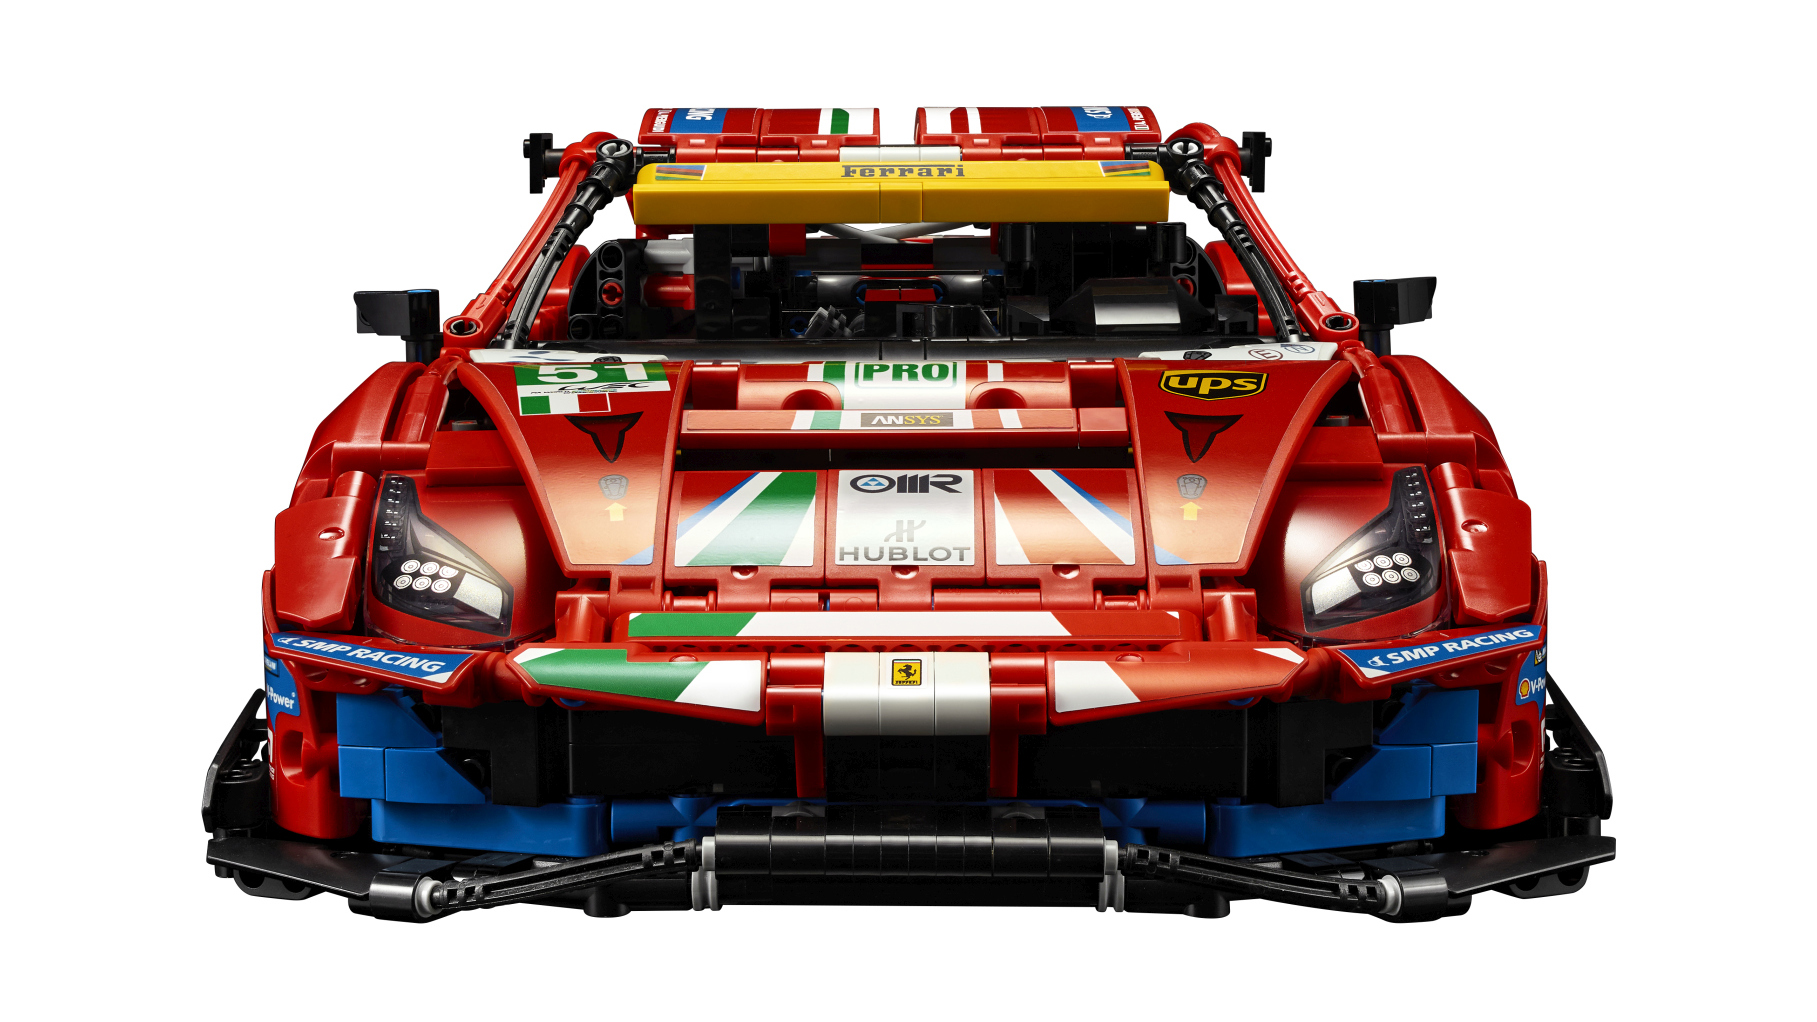 This Lego Technic Ferrari 488 GTE model is an incredibly detailed recreation of a legendary race car